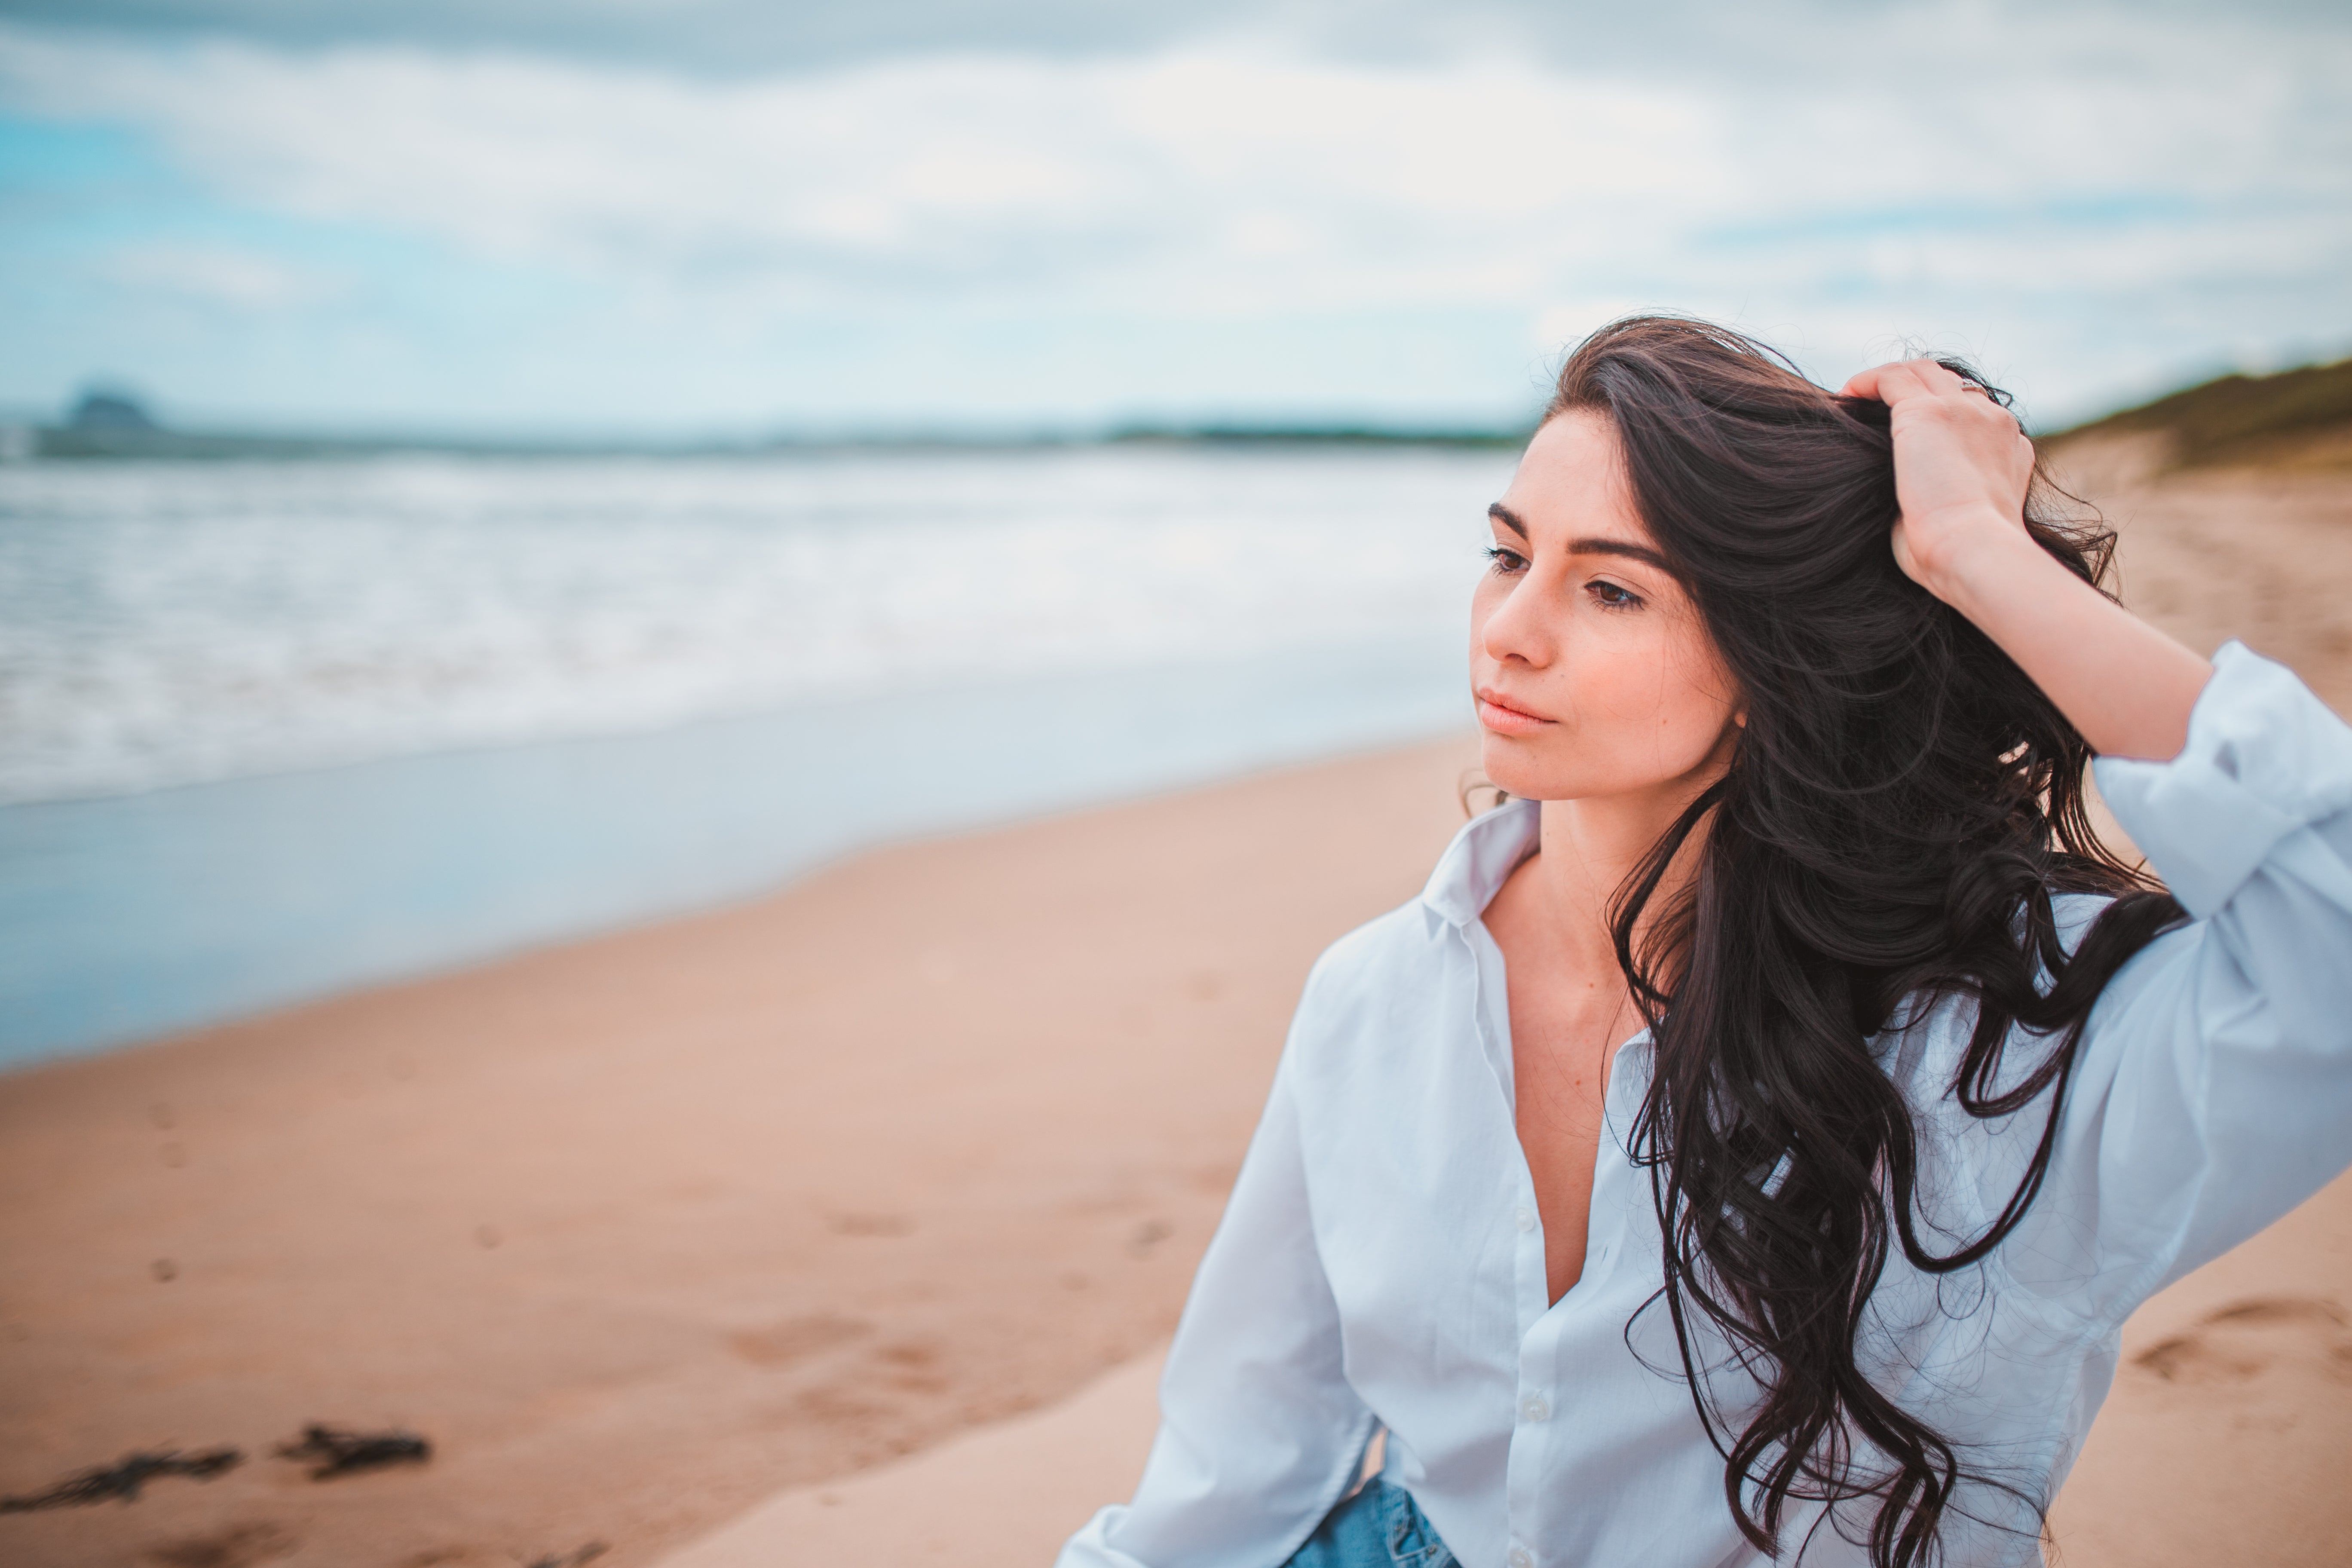 A female model is sitting on a beach looking out towards the sea. She has long, wavy, brown hair and has one hand placed on her head scrunching her waves. She is wearing a blue shirt and blue jeans. She has a neutral expression on her face.